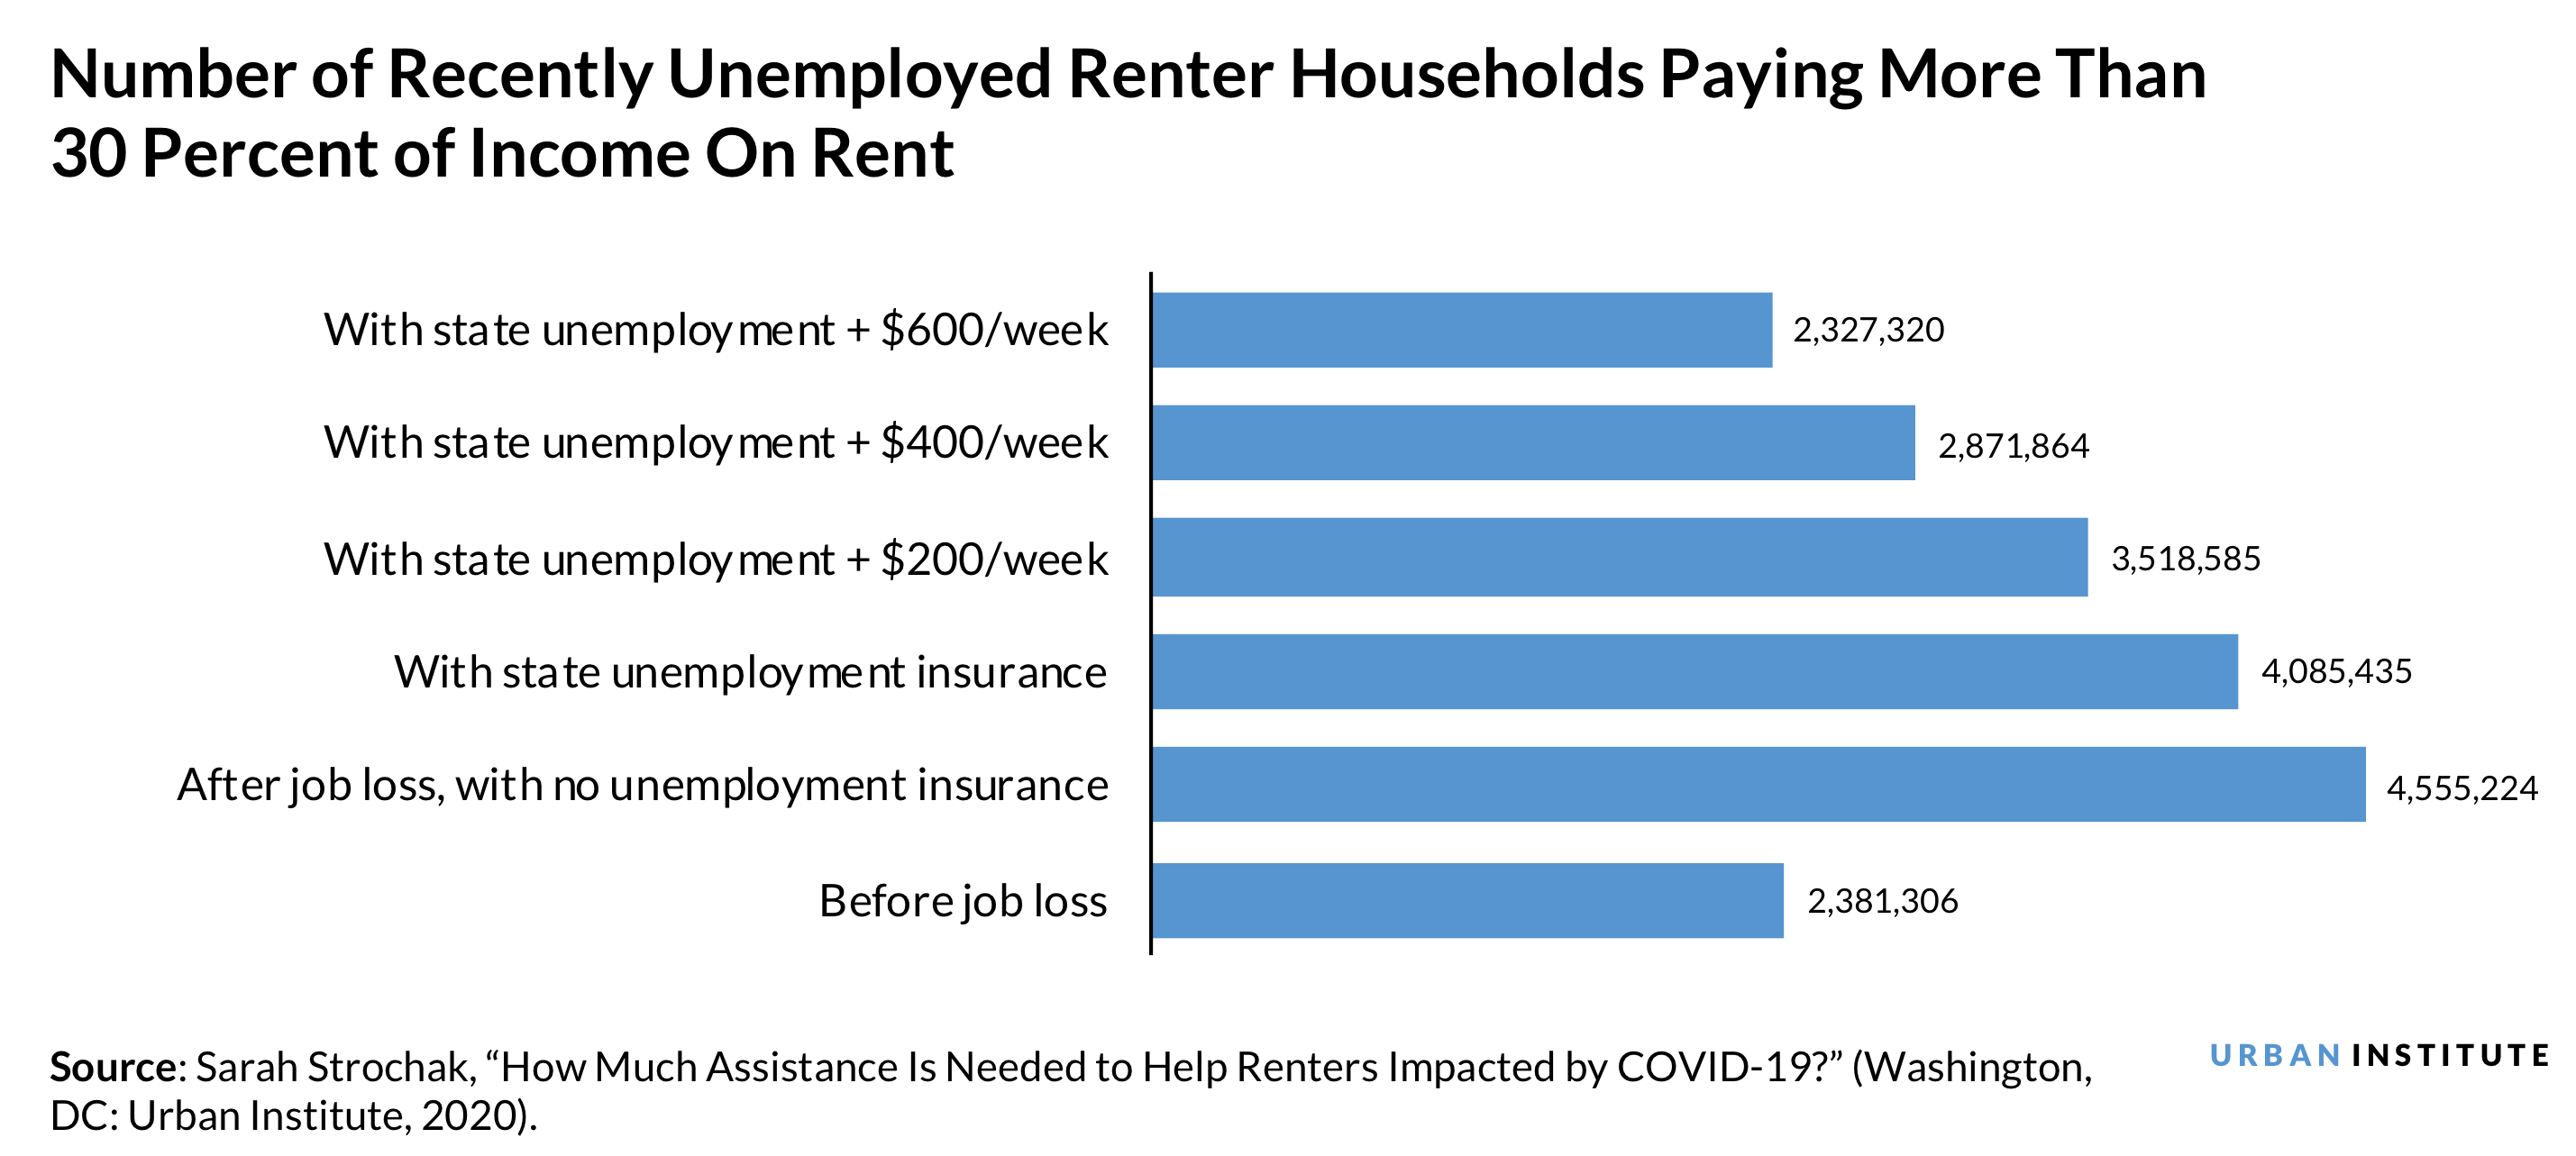 Number of unemployed renters who are cost burdened